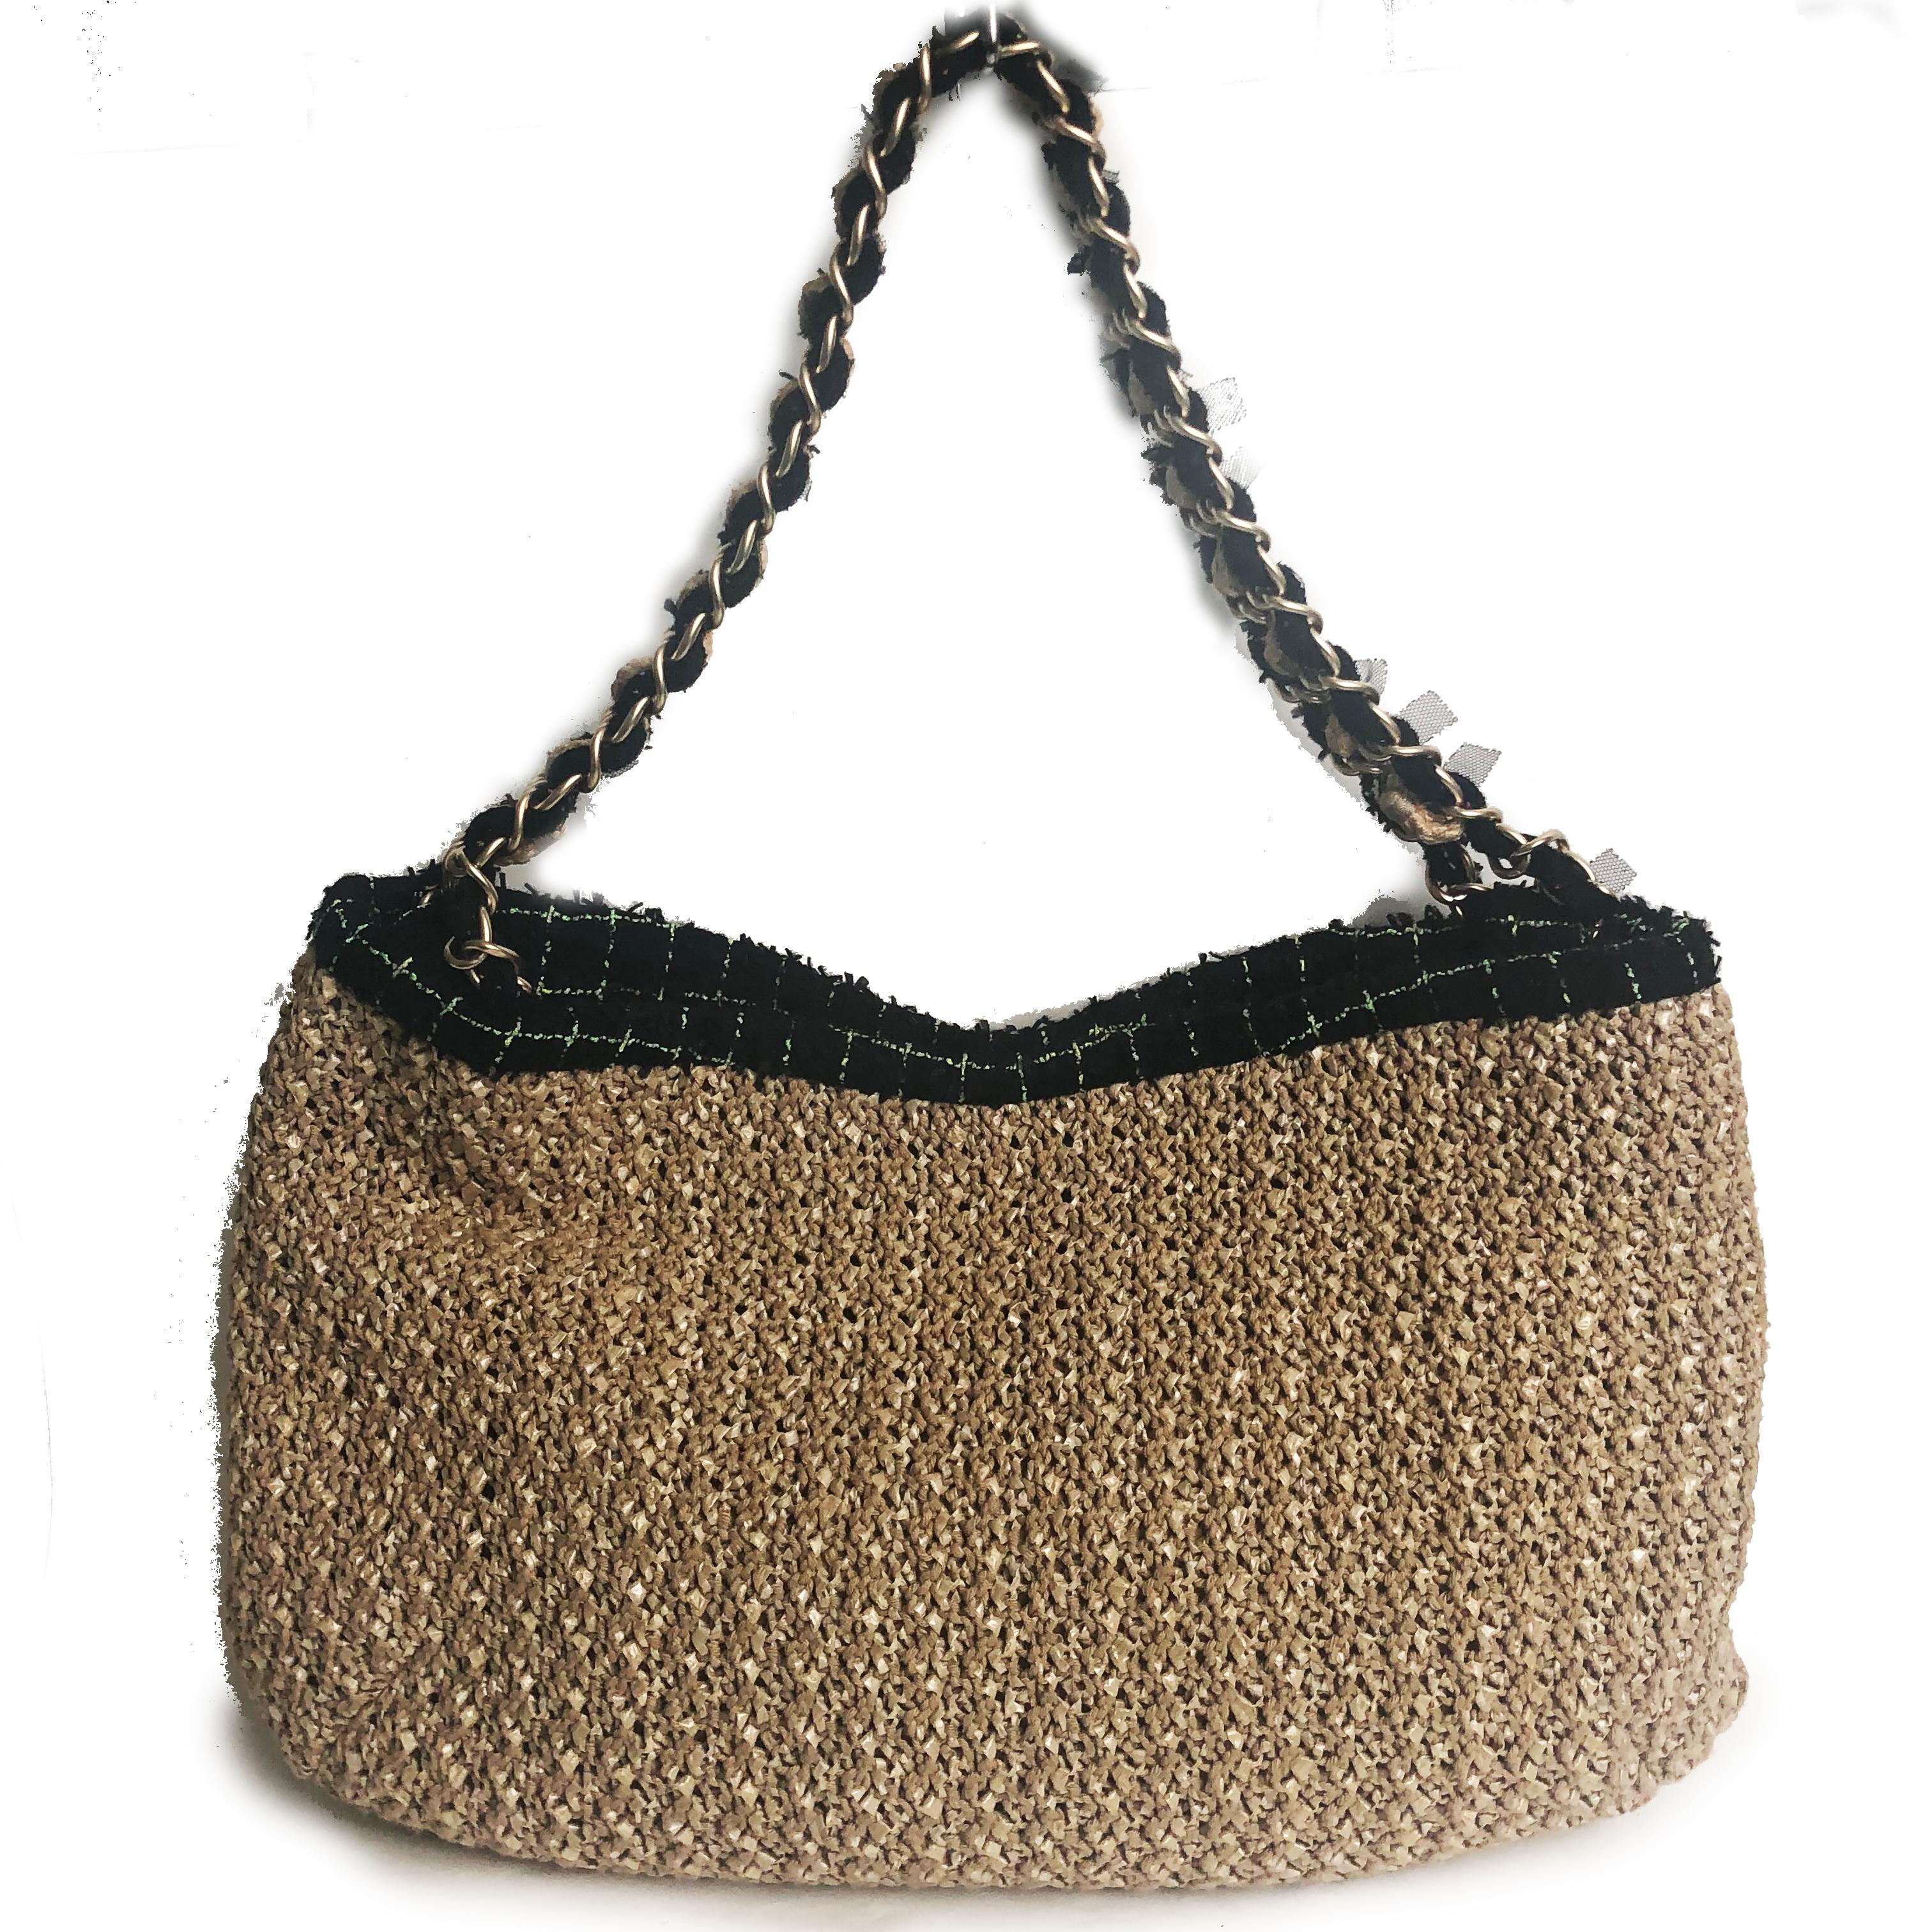 Women's or Men's Chanel Coco Country Camellia Bag Woven Straw Tote 2010 Collection 